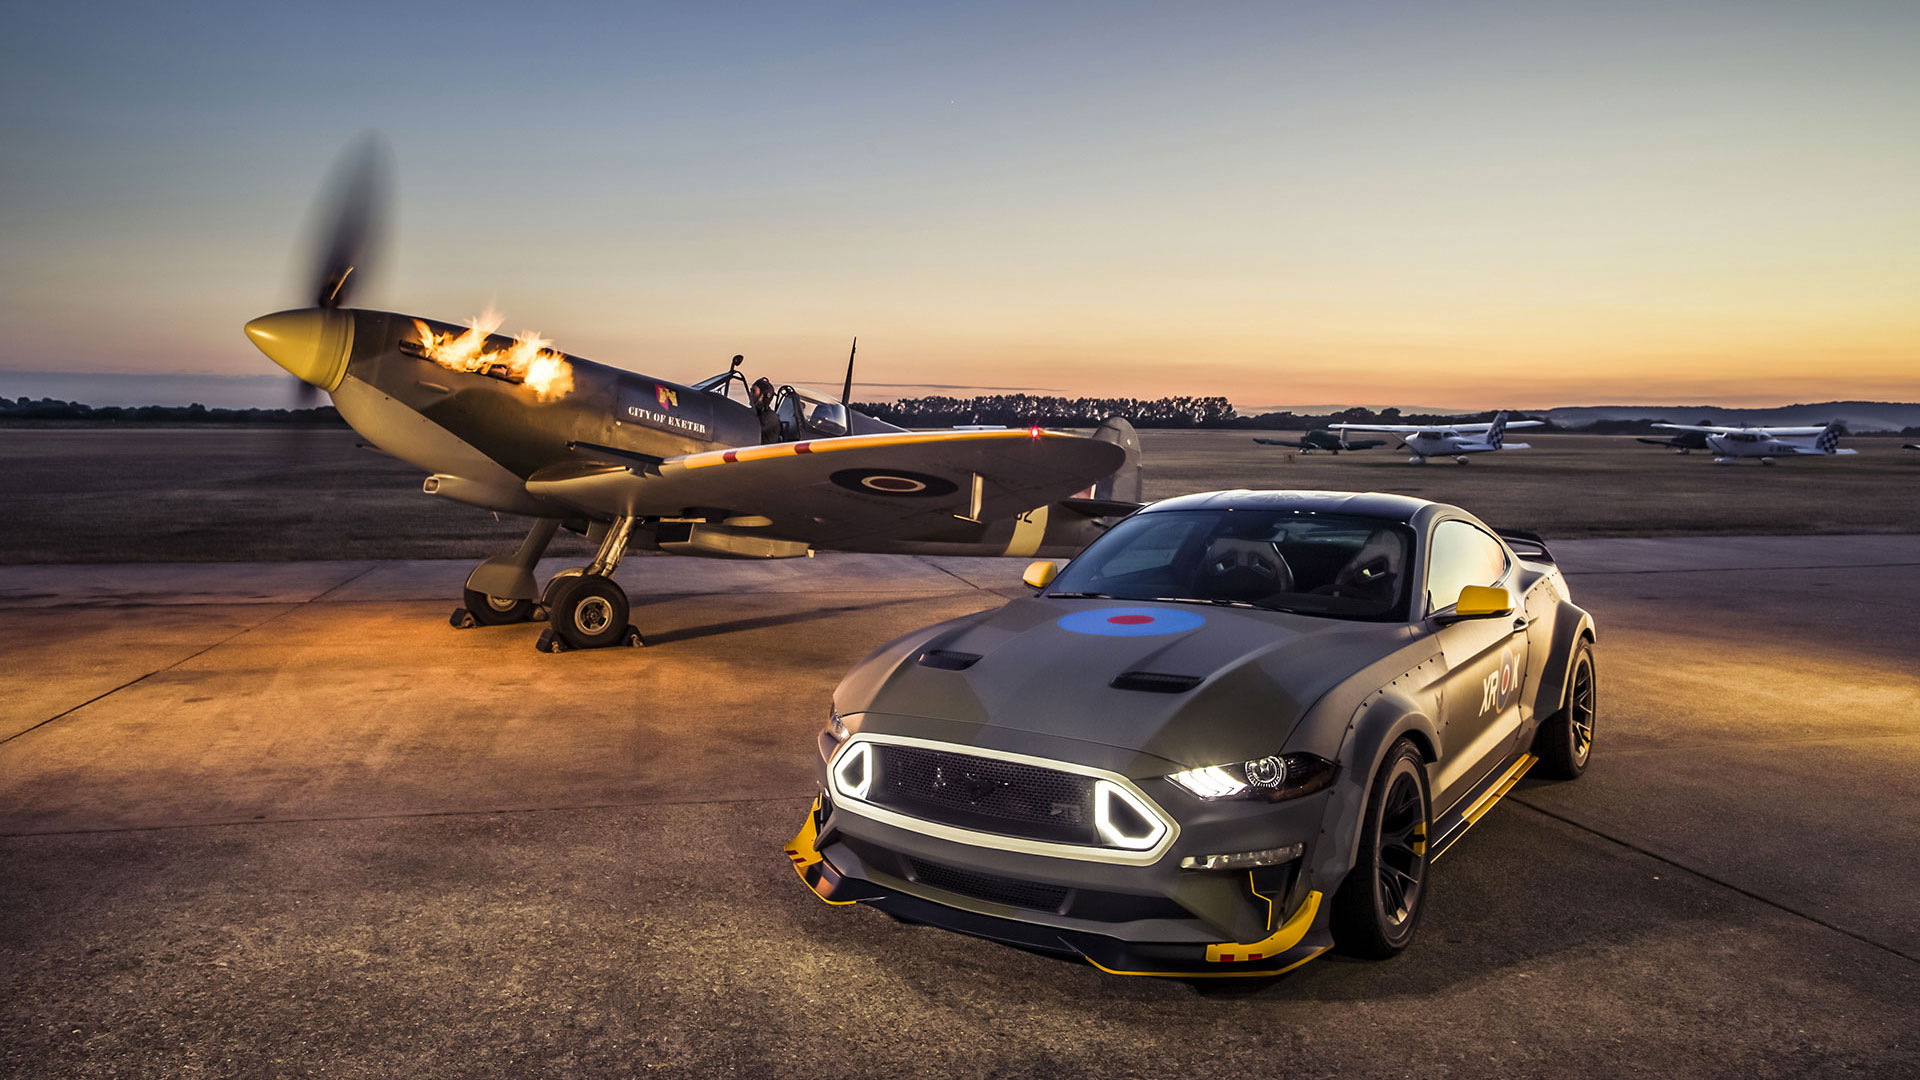 Ford Eagle Squadron Mustang Gt Wallpapers